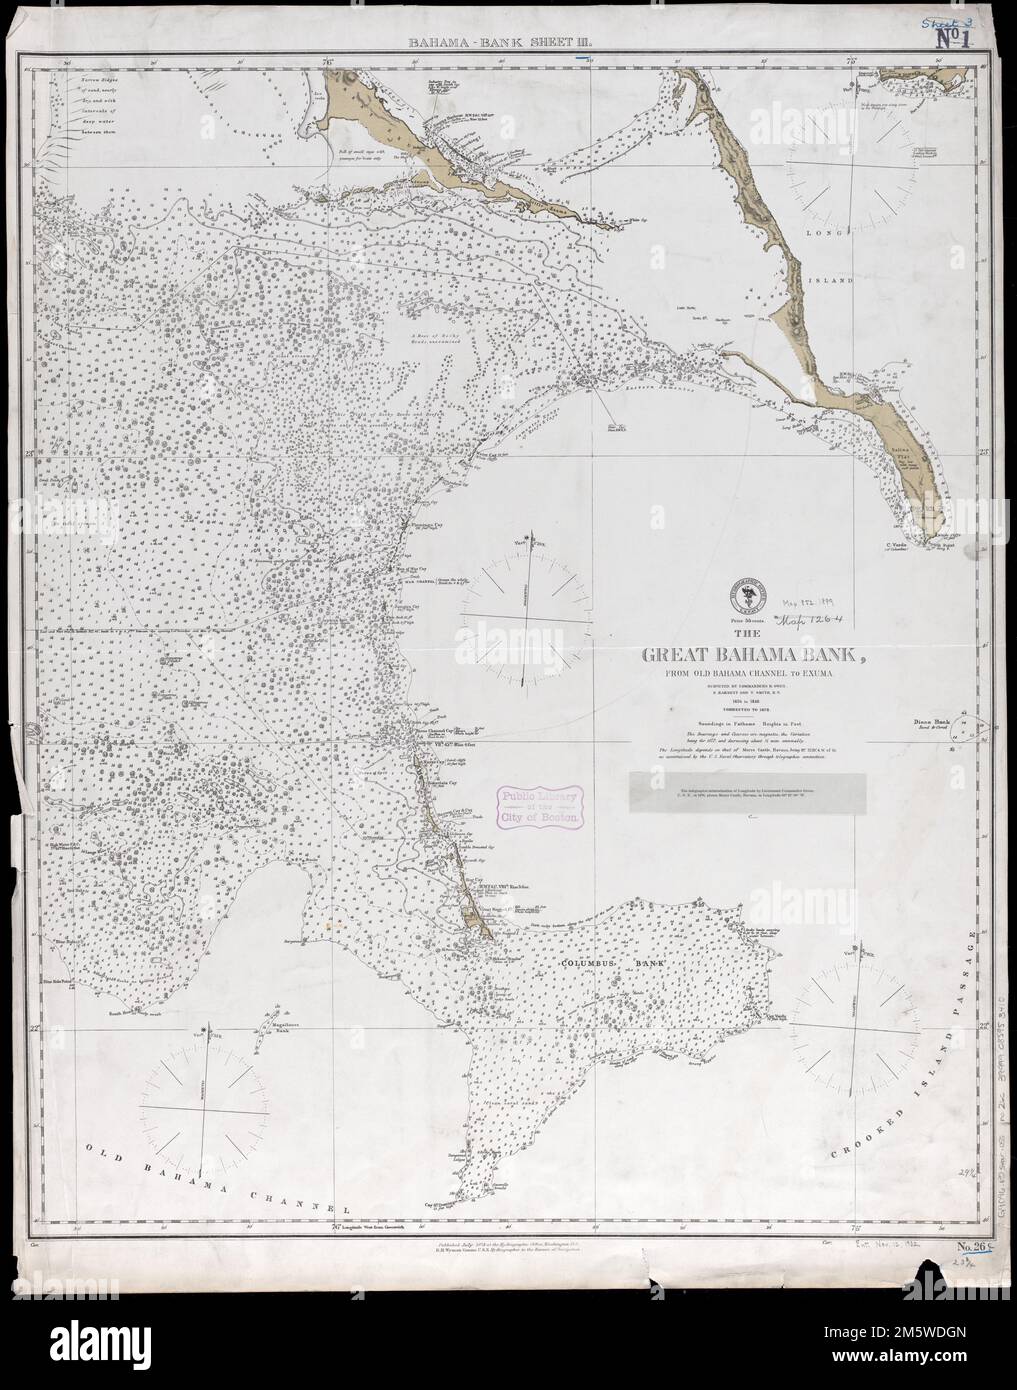 The Great Bahama Bank, from Old Bahama Channel to Exuma. Relief shown by hachures and spot heights. Depths shown by soundings and isolines. Note pasted below title: The telegraphic determination of longitude by Lieutenant Commander Green, U.S.N., in 1876, places Morro Castle, Havana, in longitude 82°21'30" W... Bahama-Bank sheet III. Bahama-Bank sheet III, Bahamas Great Bahama Bank Stock Photo